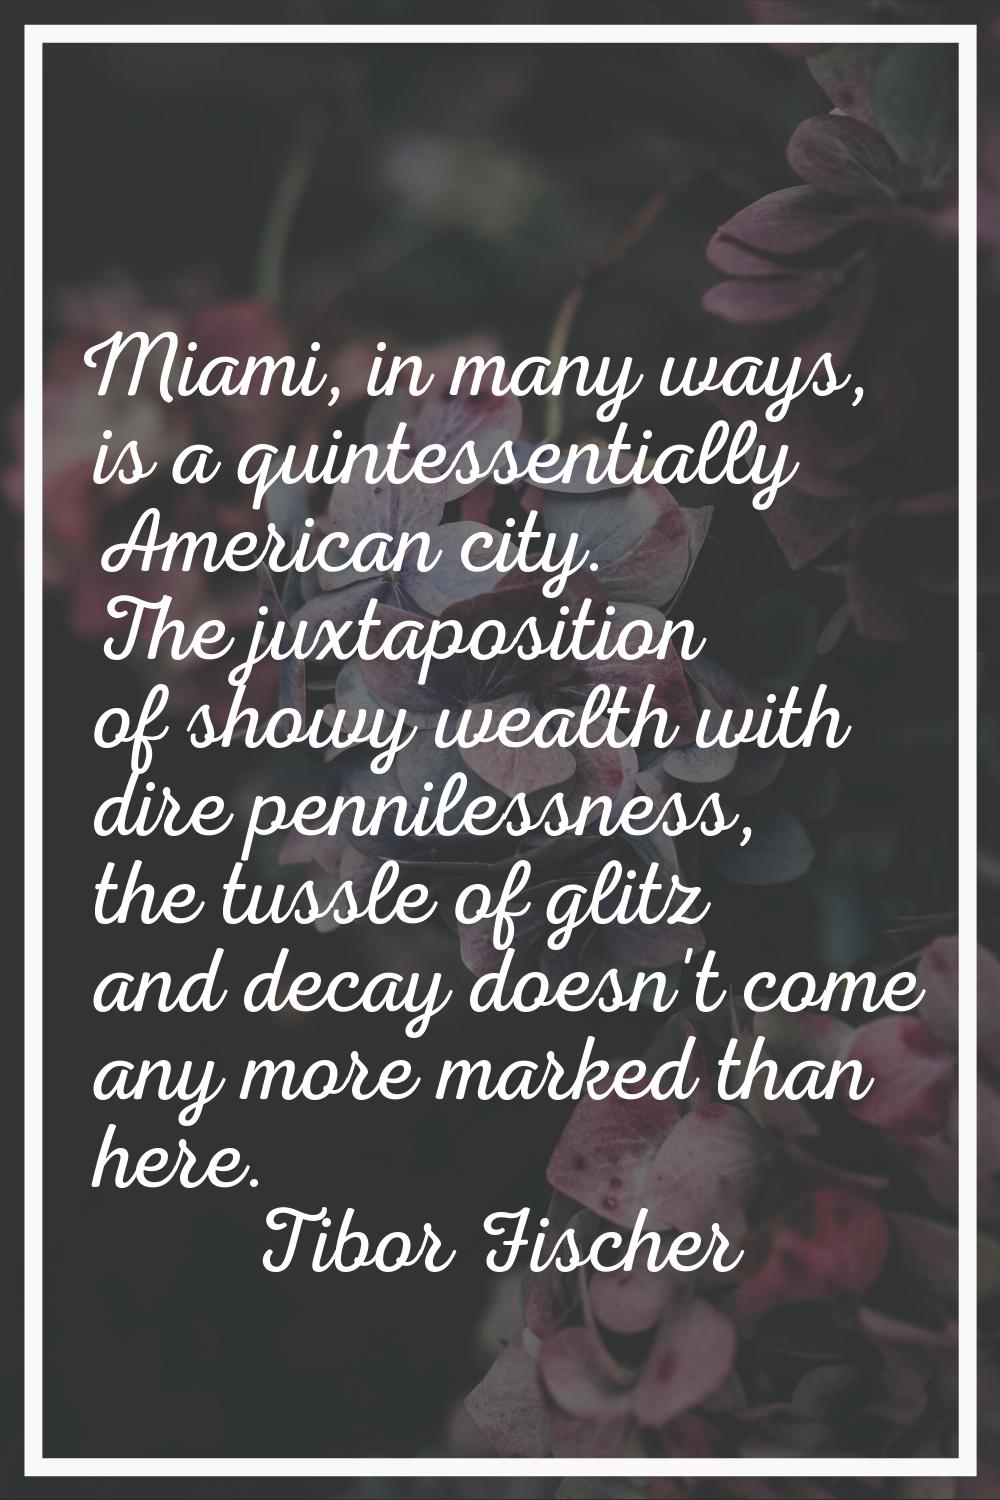 Miami, in many ways, is a quintessentially American city. The juxtaposition of showy wealth with di